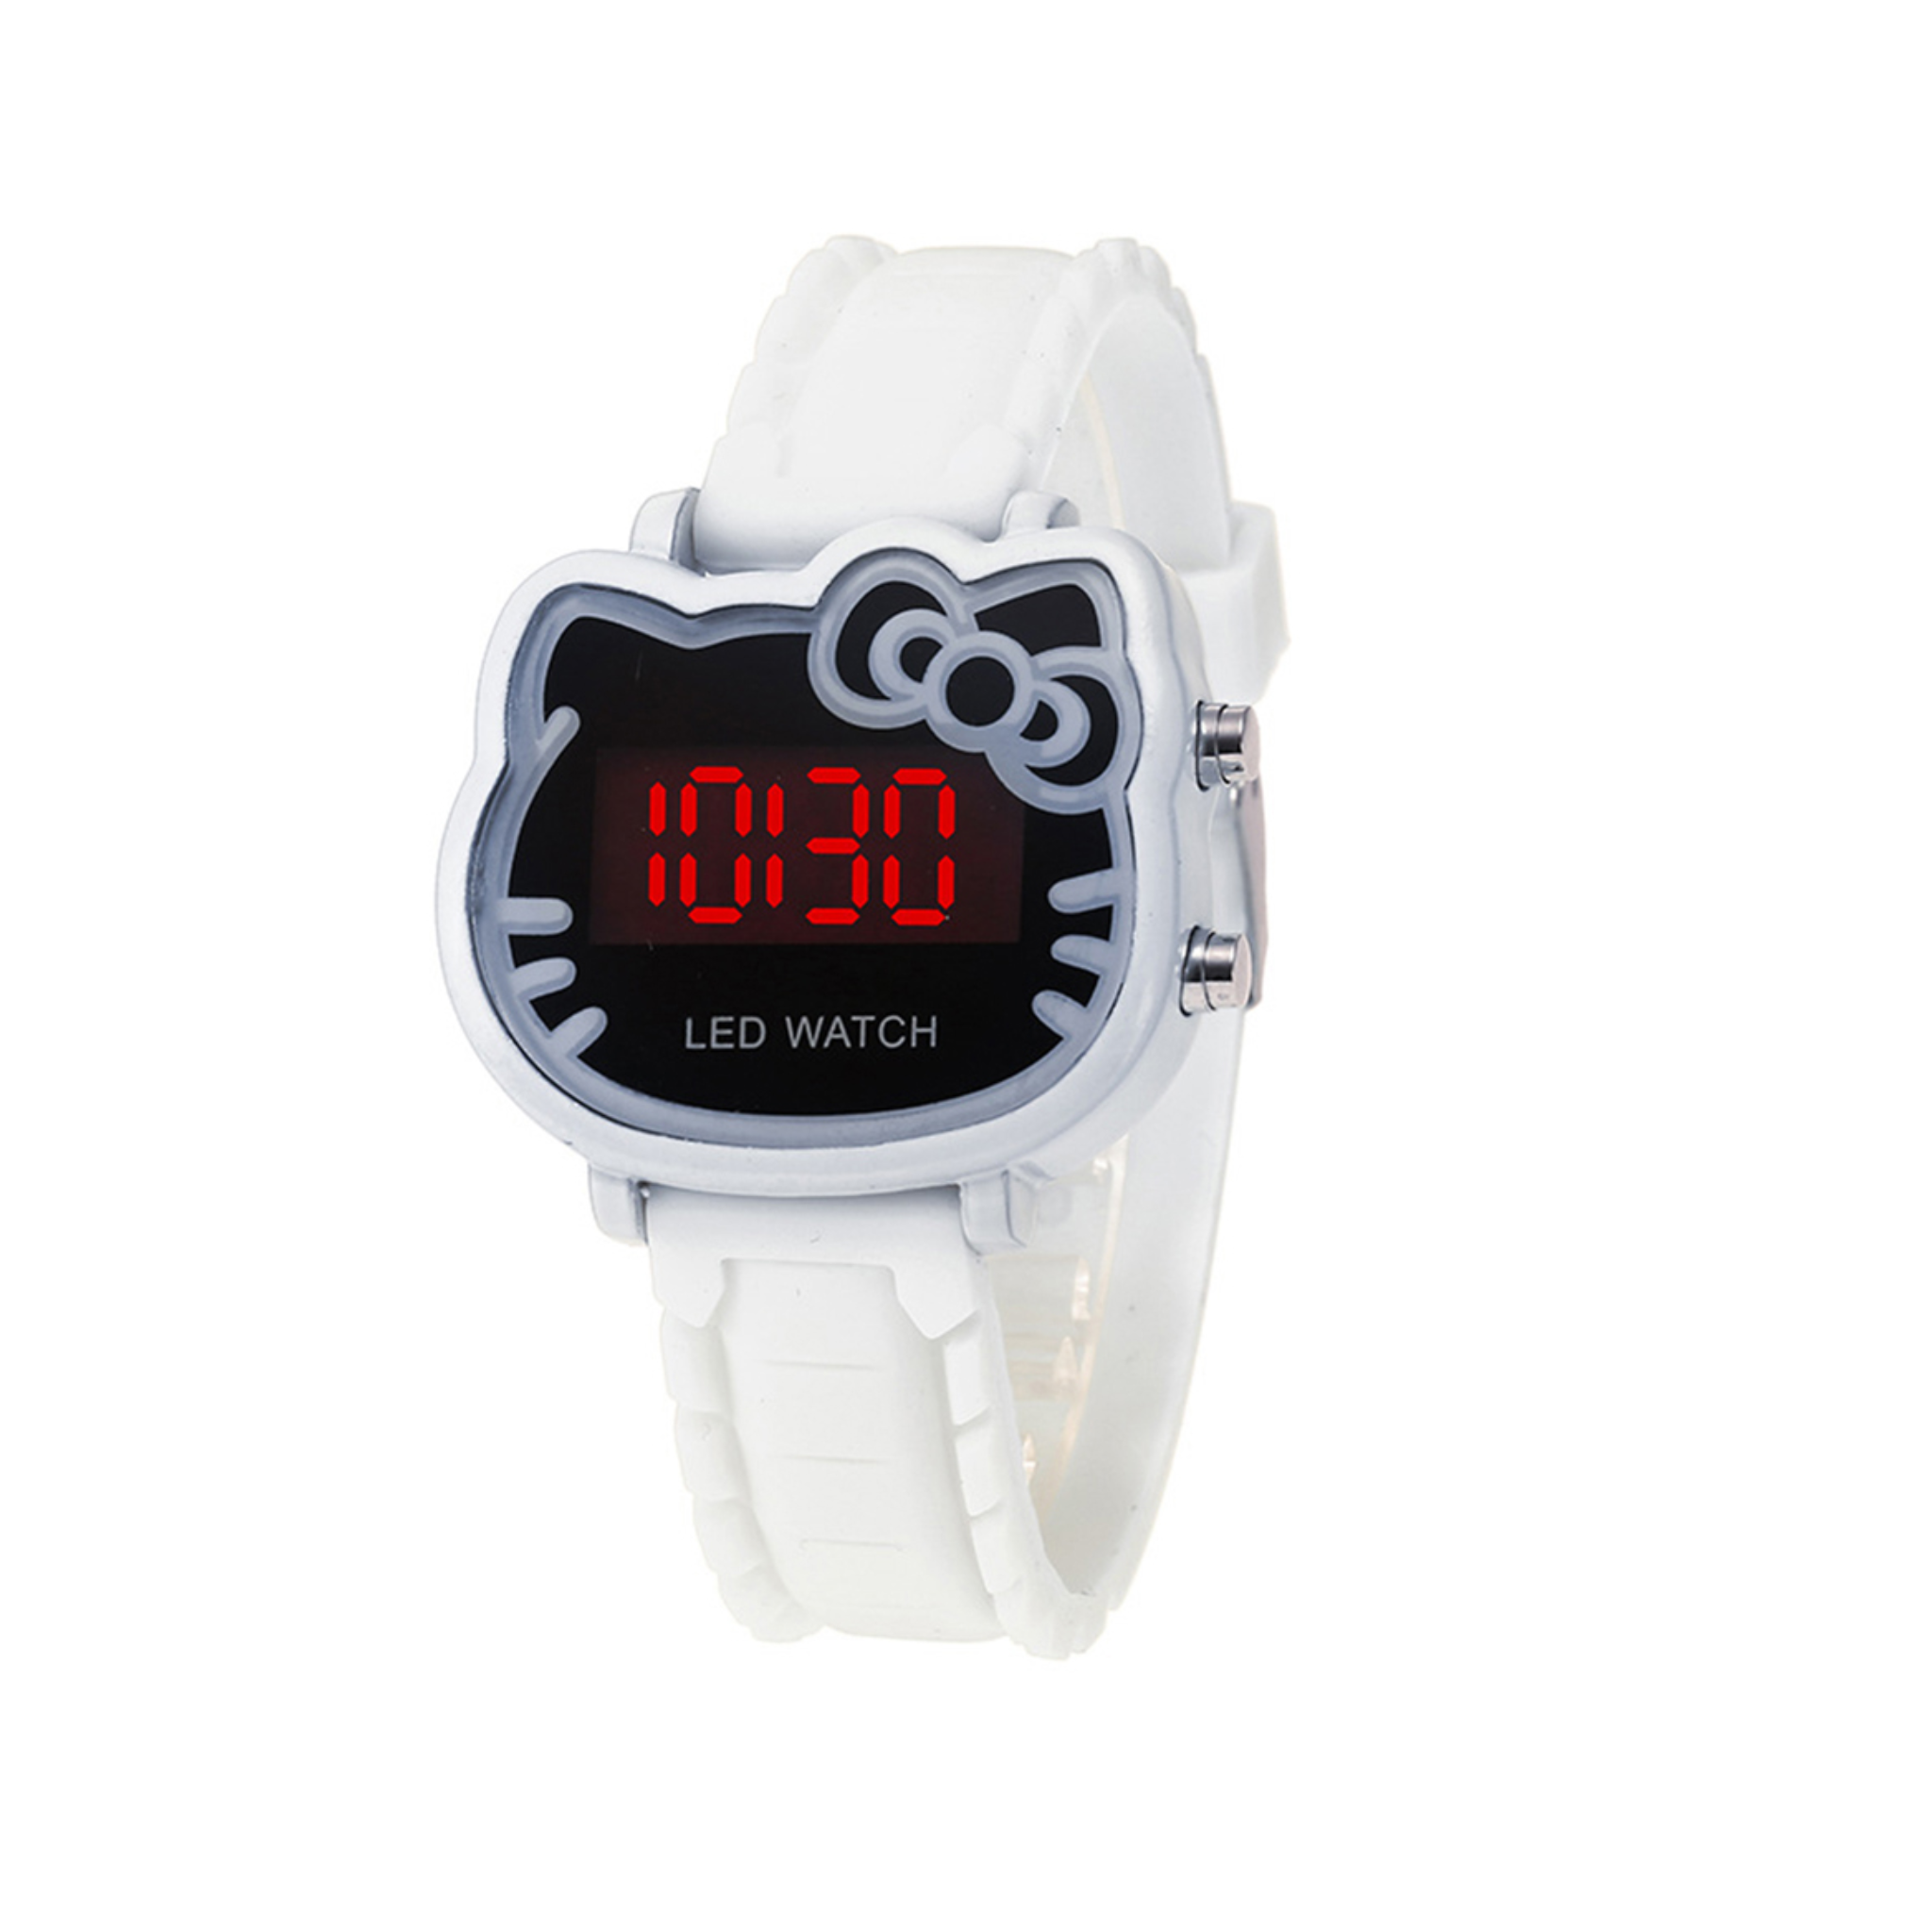 Wristwatch, Digital Time Display with Large Silicone Band, For Kids